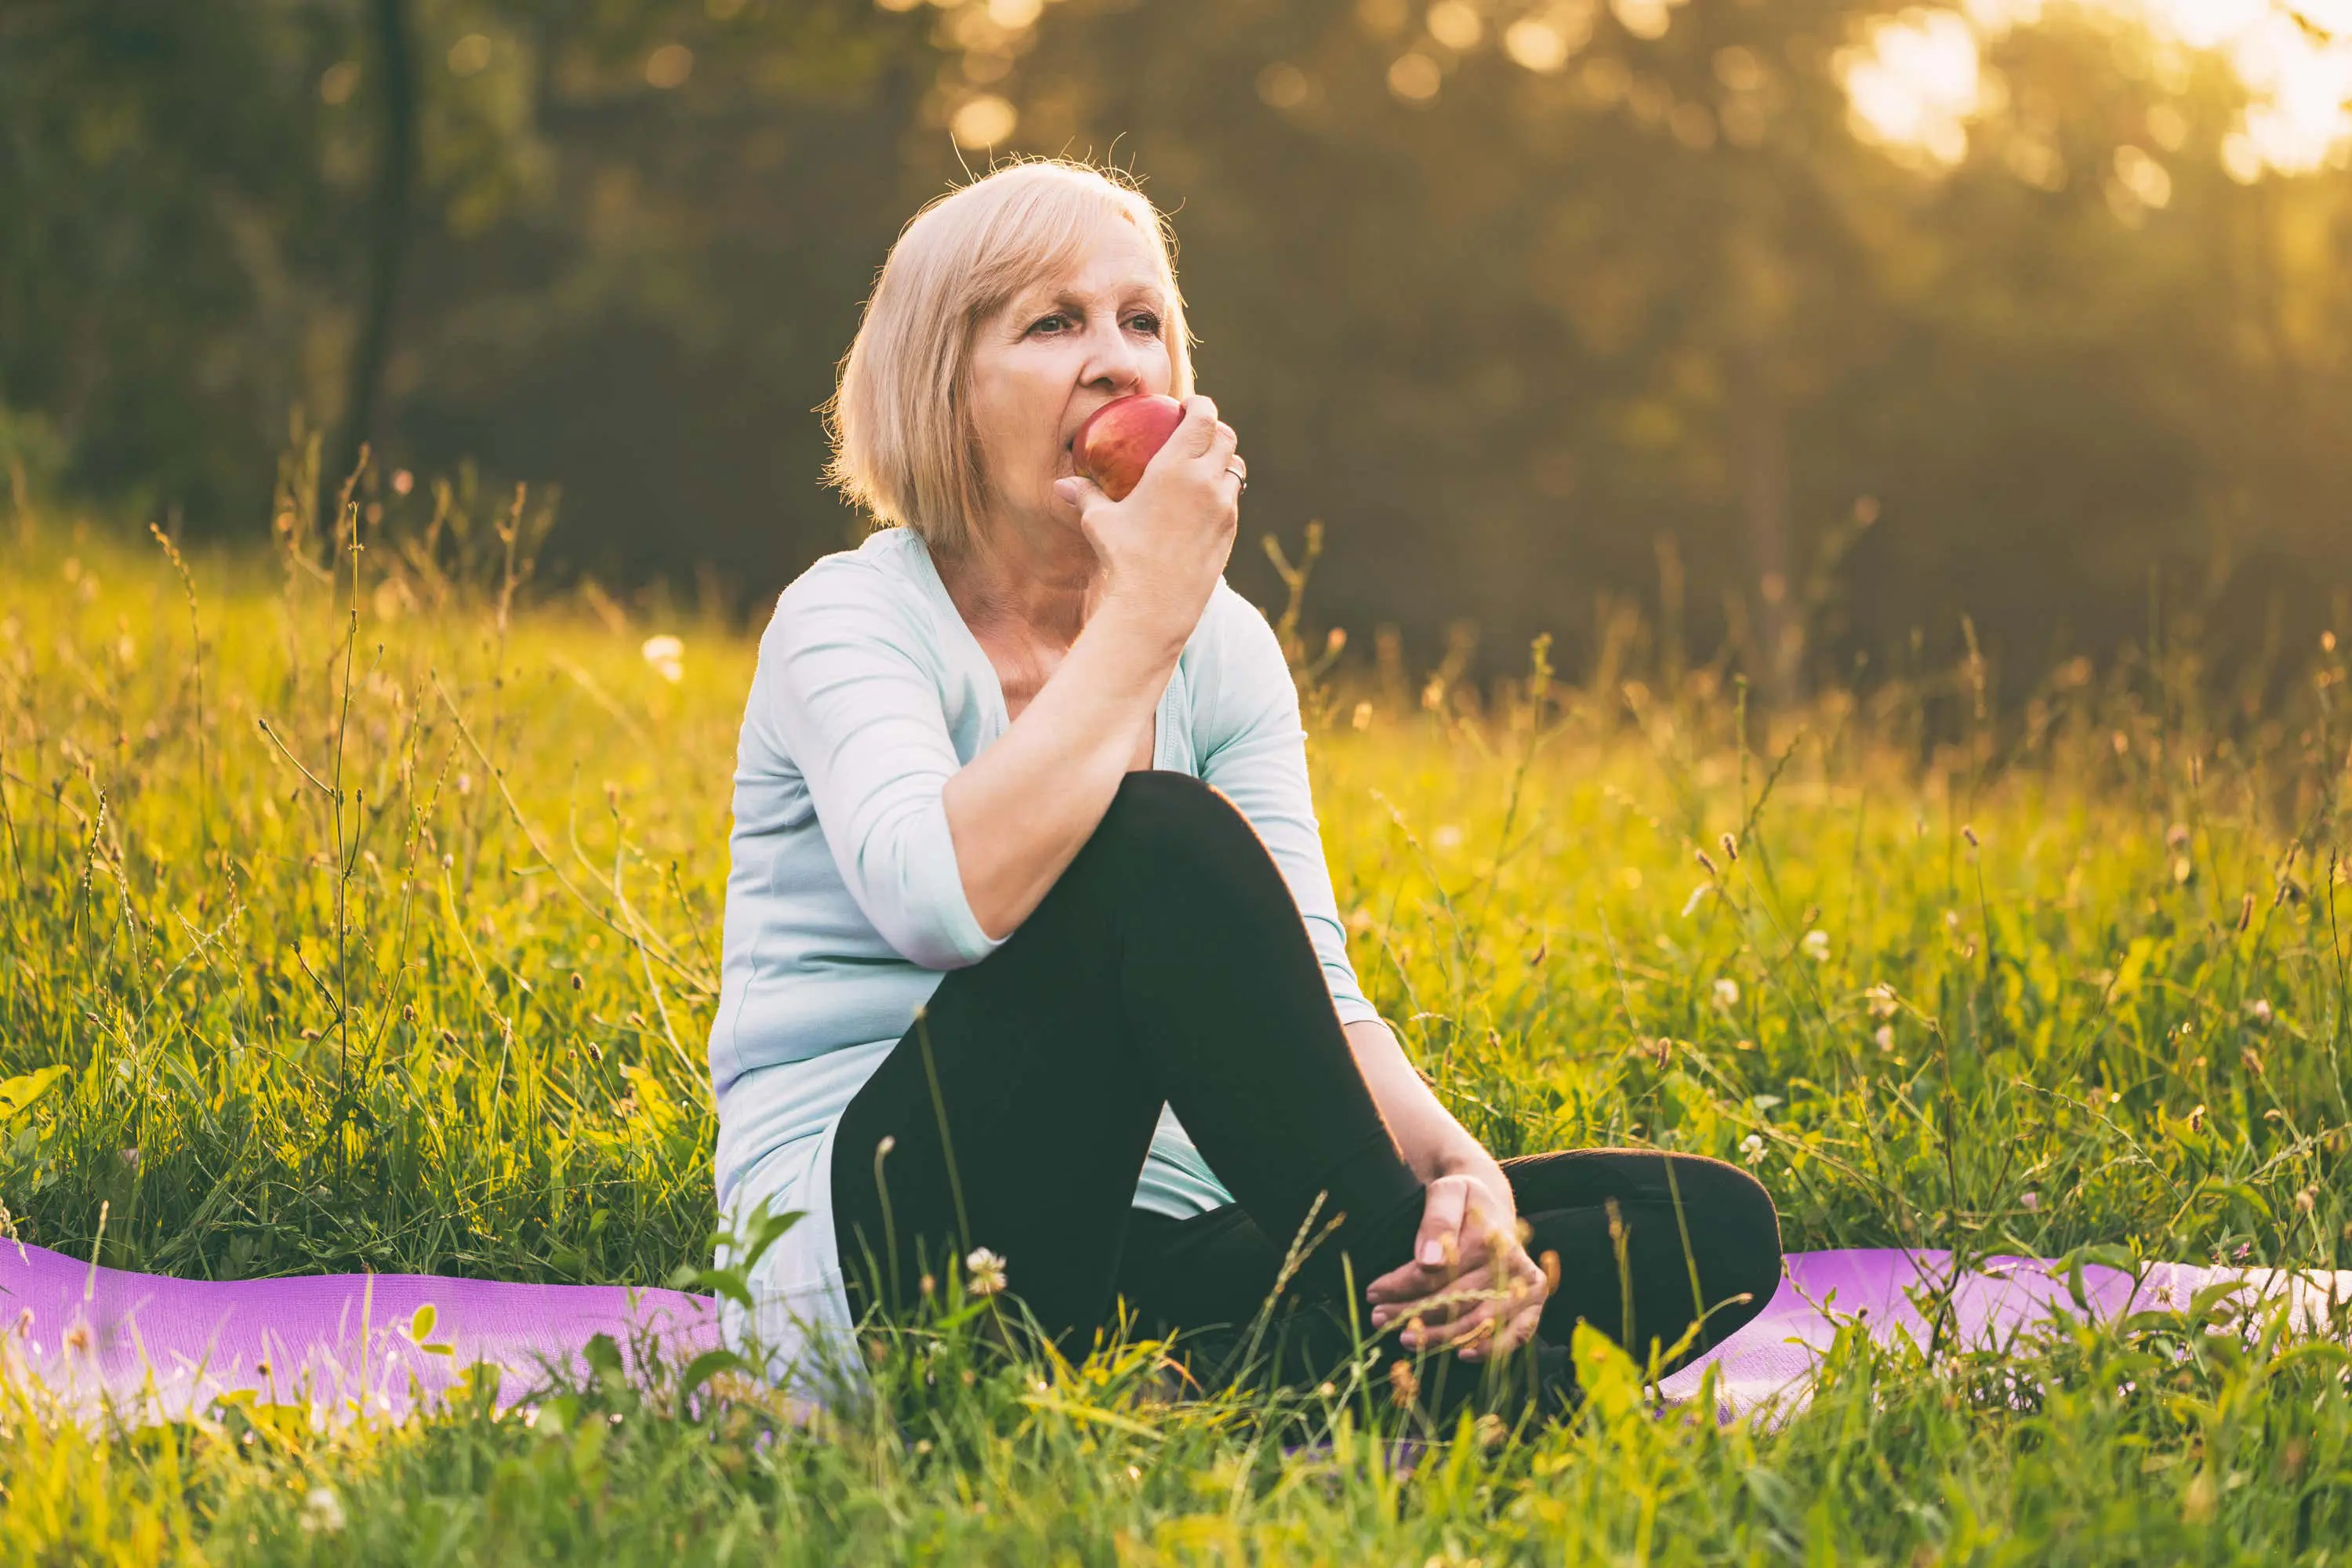 Woman on picnic blanket eats apple scaled